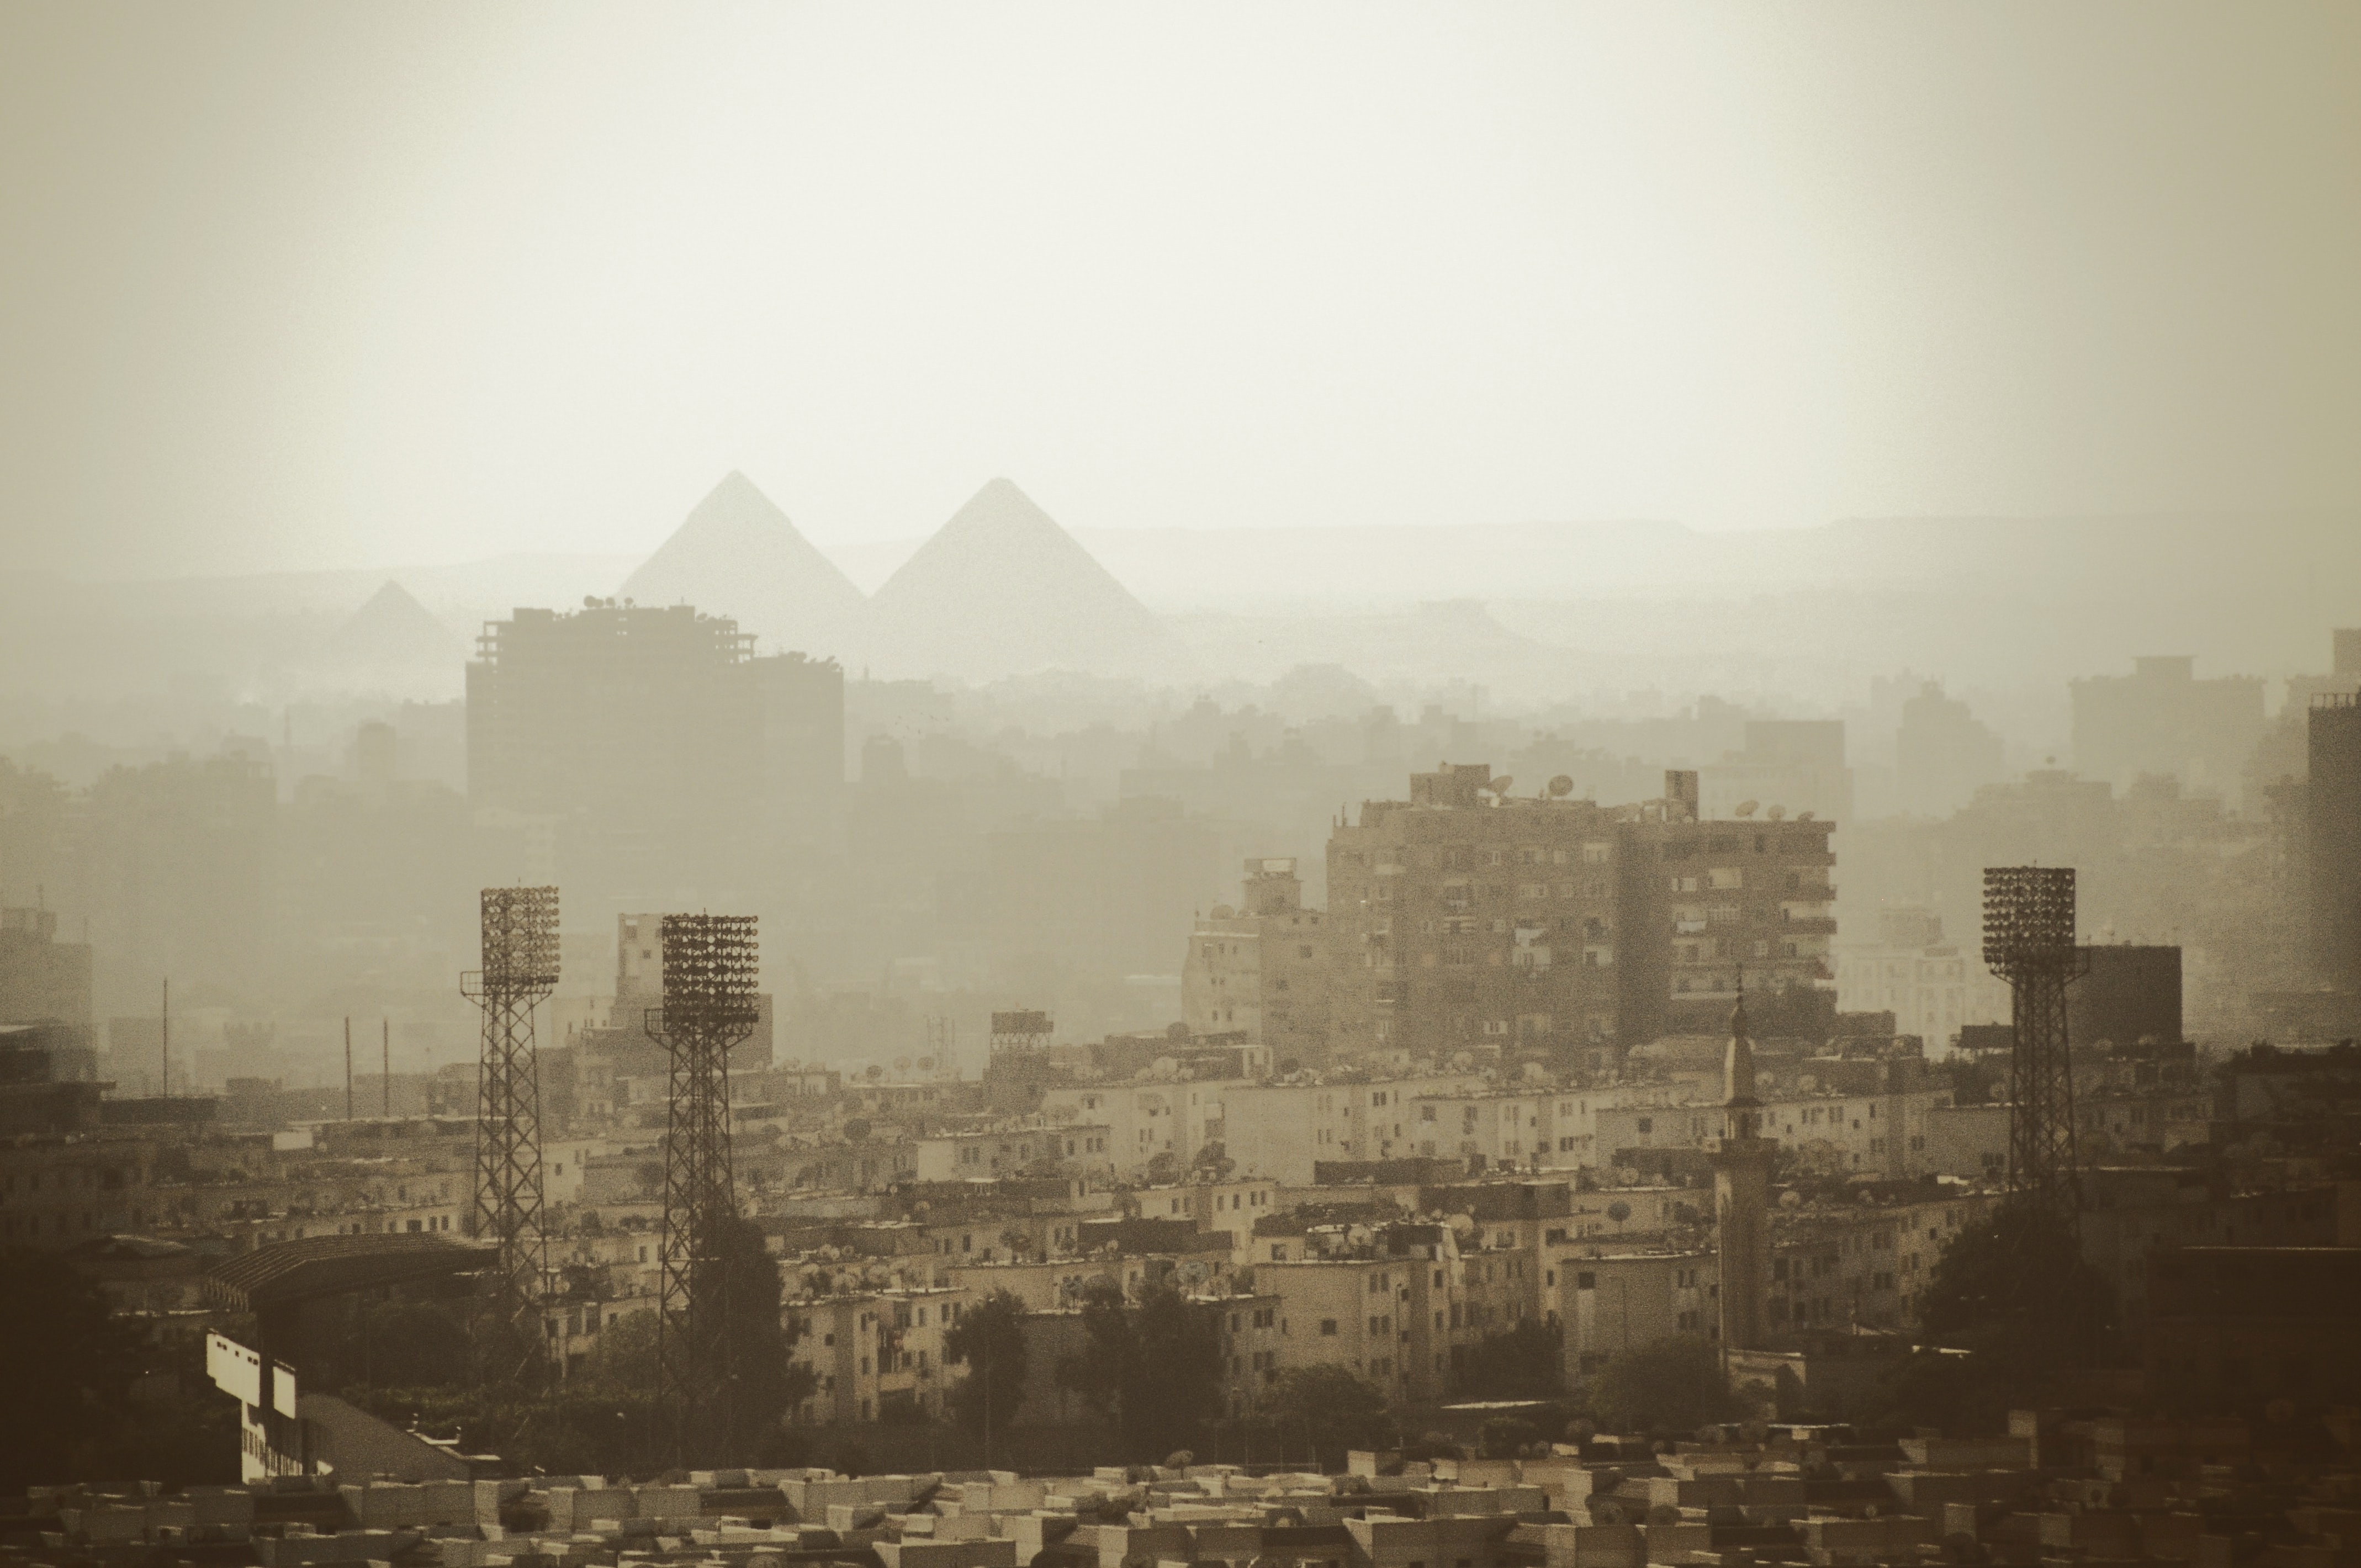 Cairo's skyline at the pyramids of Giza showing its pollution